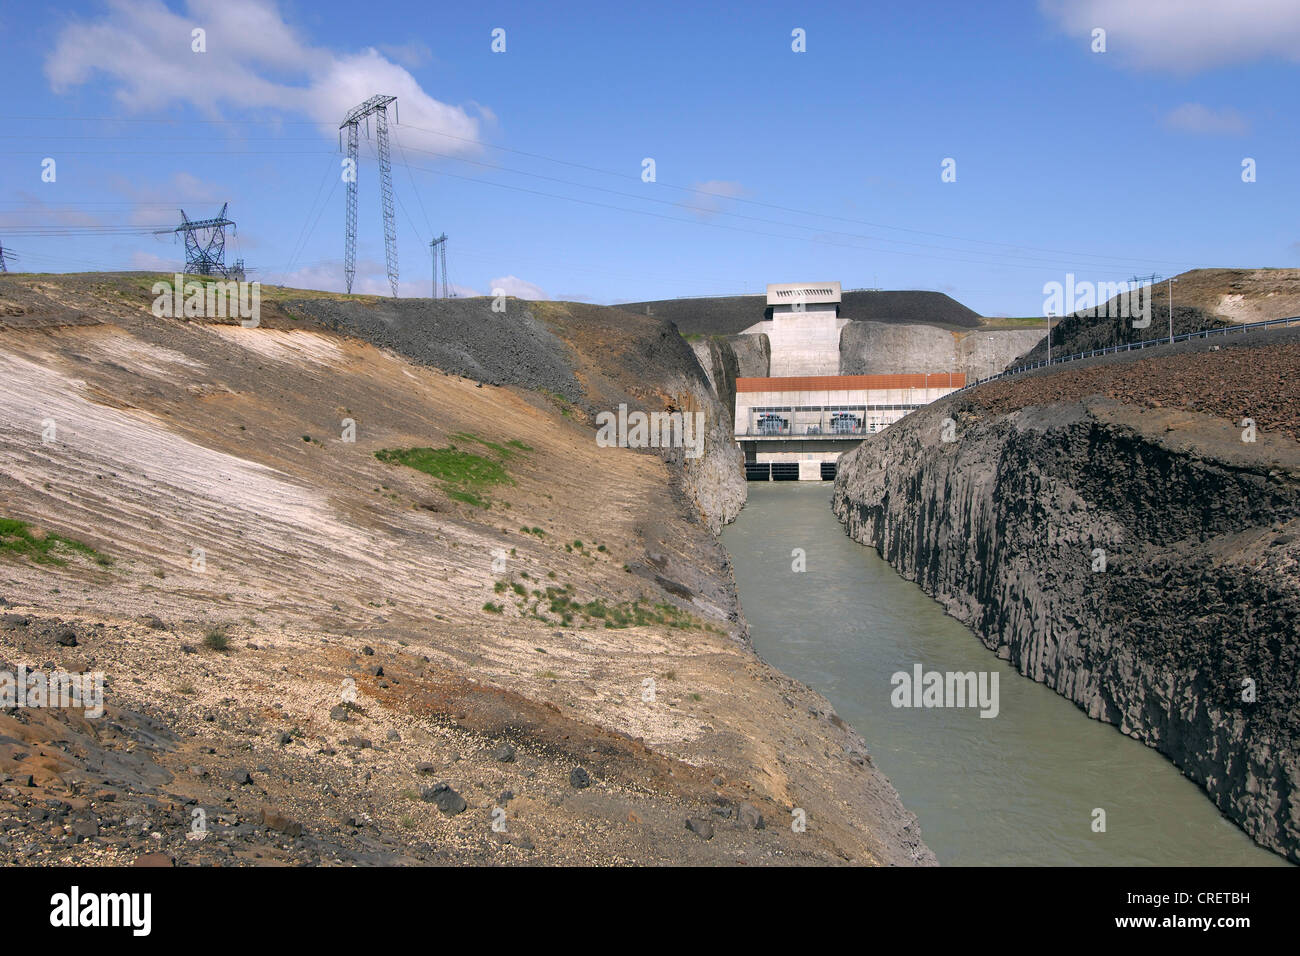 The Hrauneyfoss hydro-electric powerstation on the Tungnaa river, central Iceland, Iceland Stock Photo